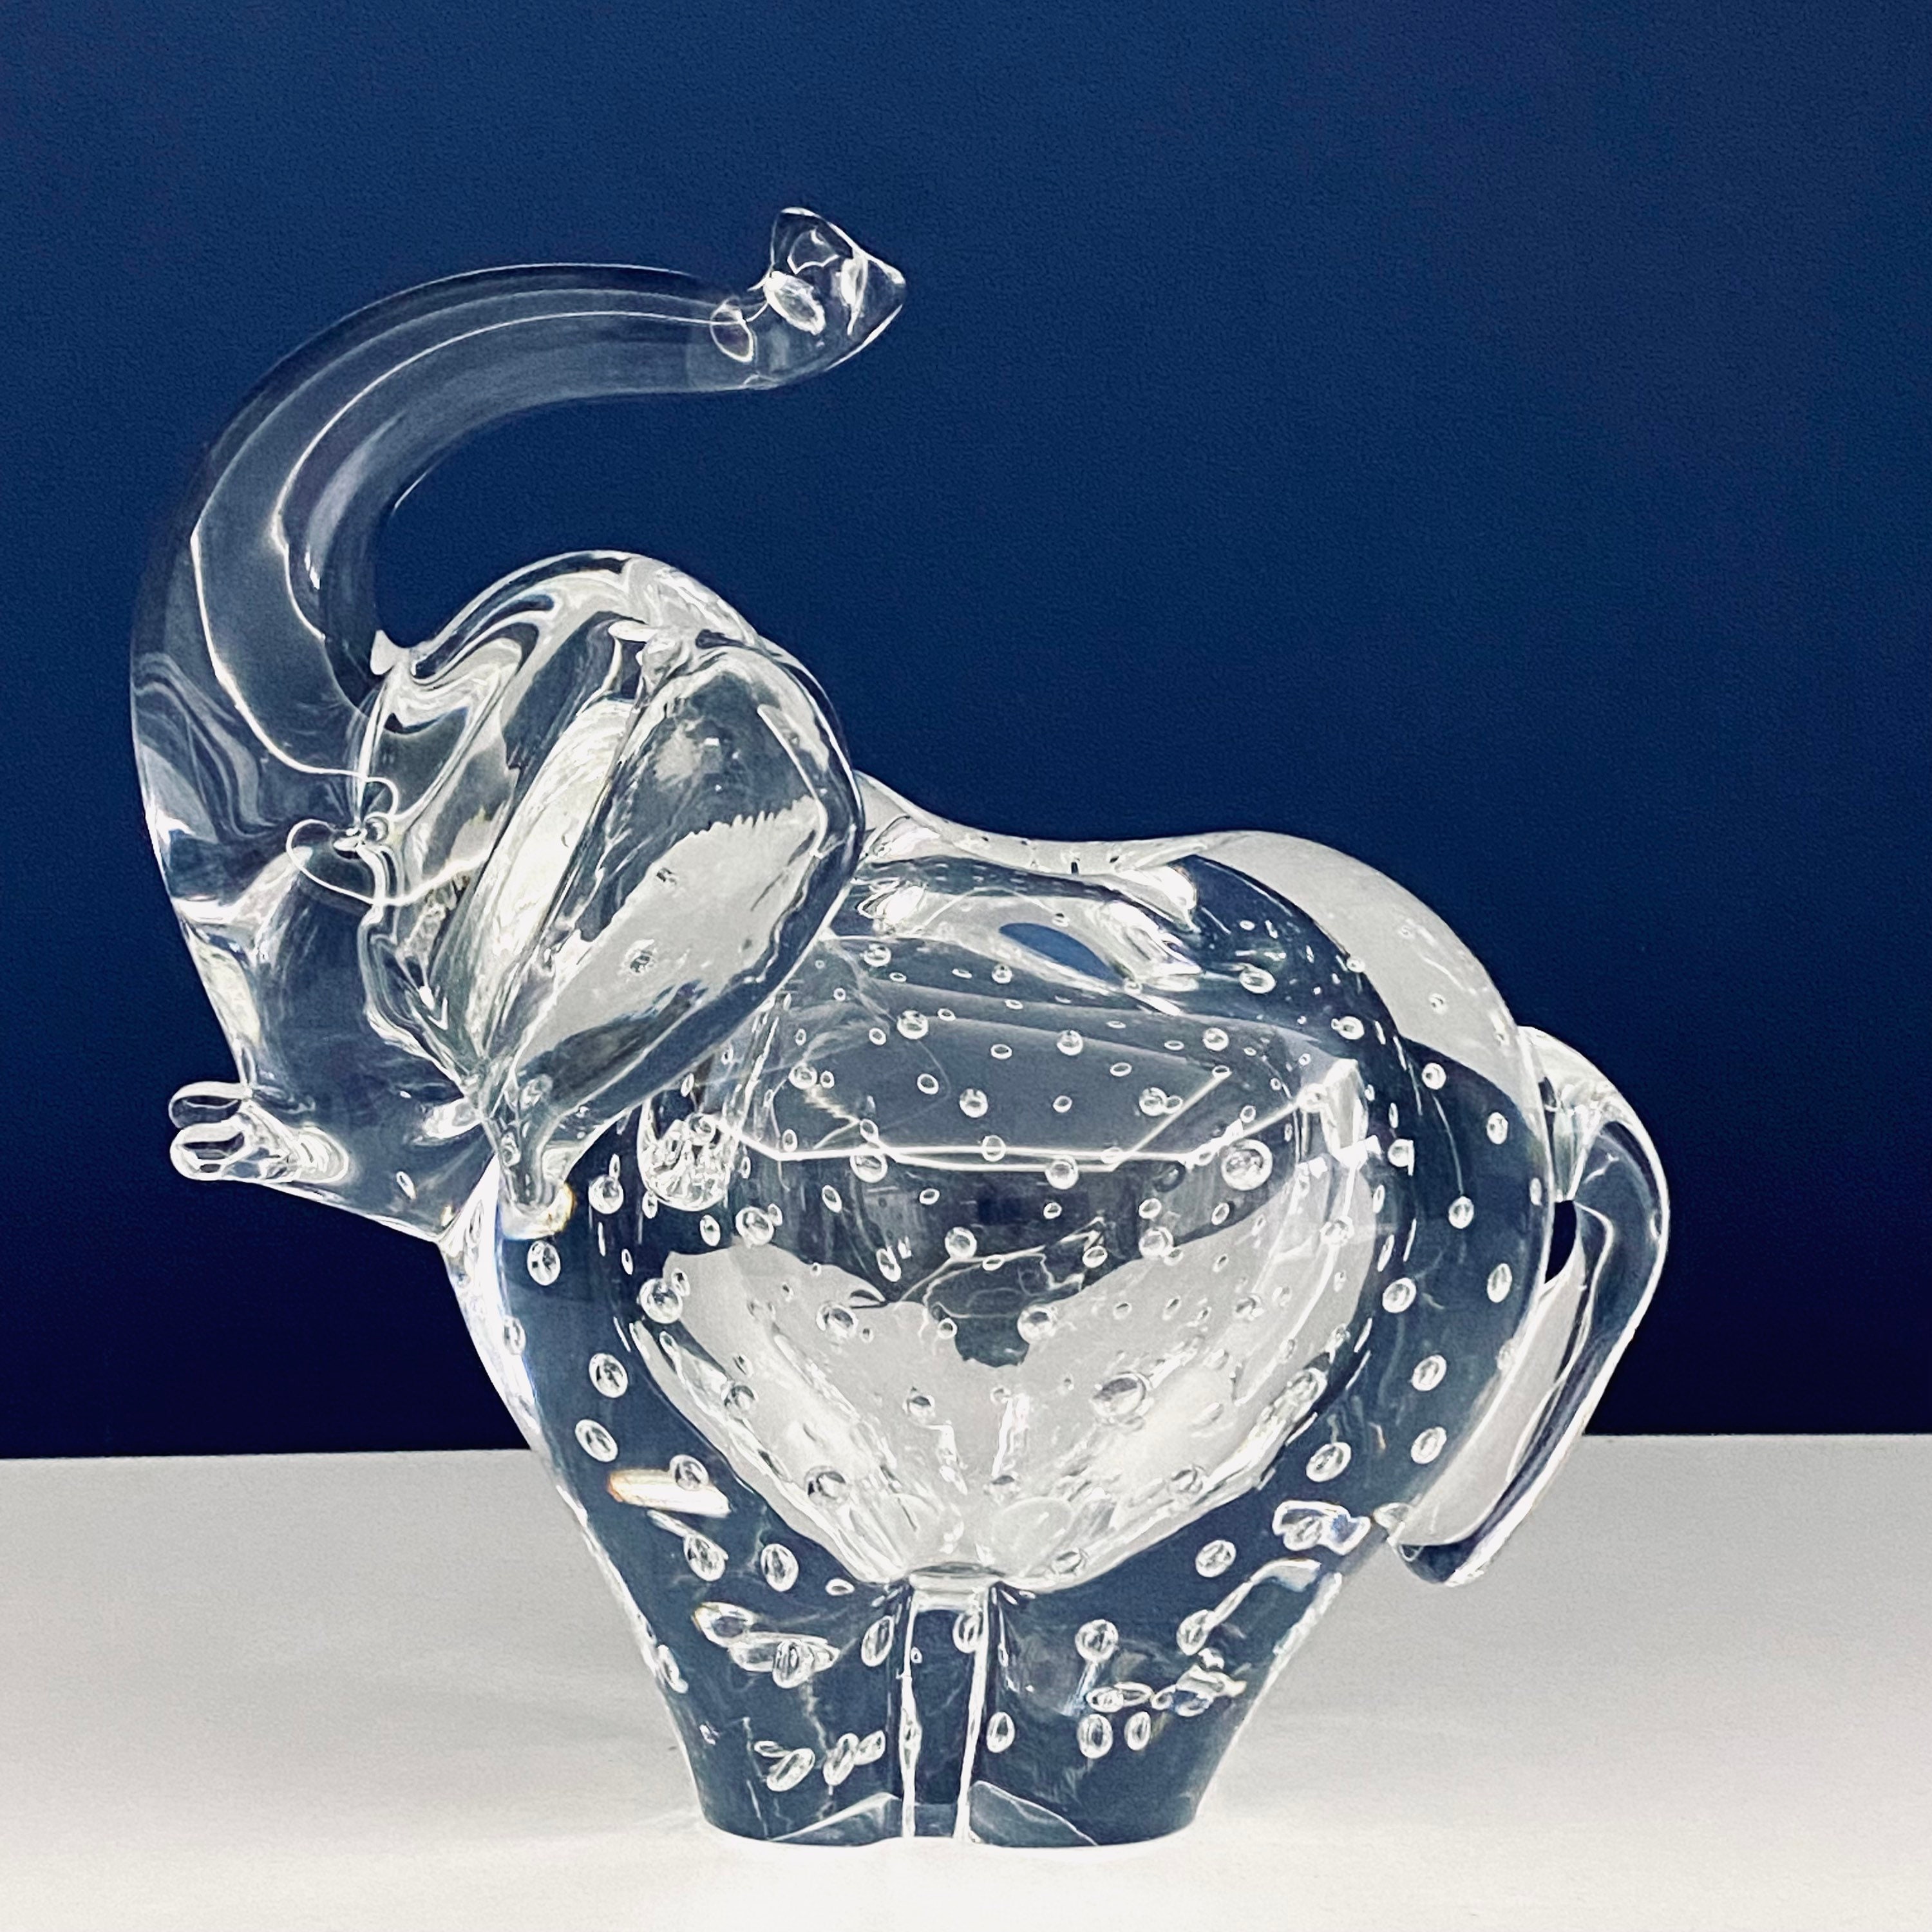  Movdyka Cute Elephant Gifts for Women Crystal Elephant Statue  Home Decor Figurine Collection Glass Ornament Animal Gifts for Elephant  Lovers : Home & Kitchen